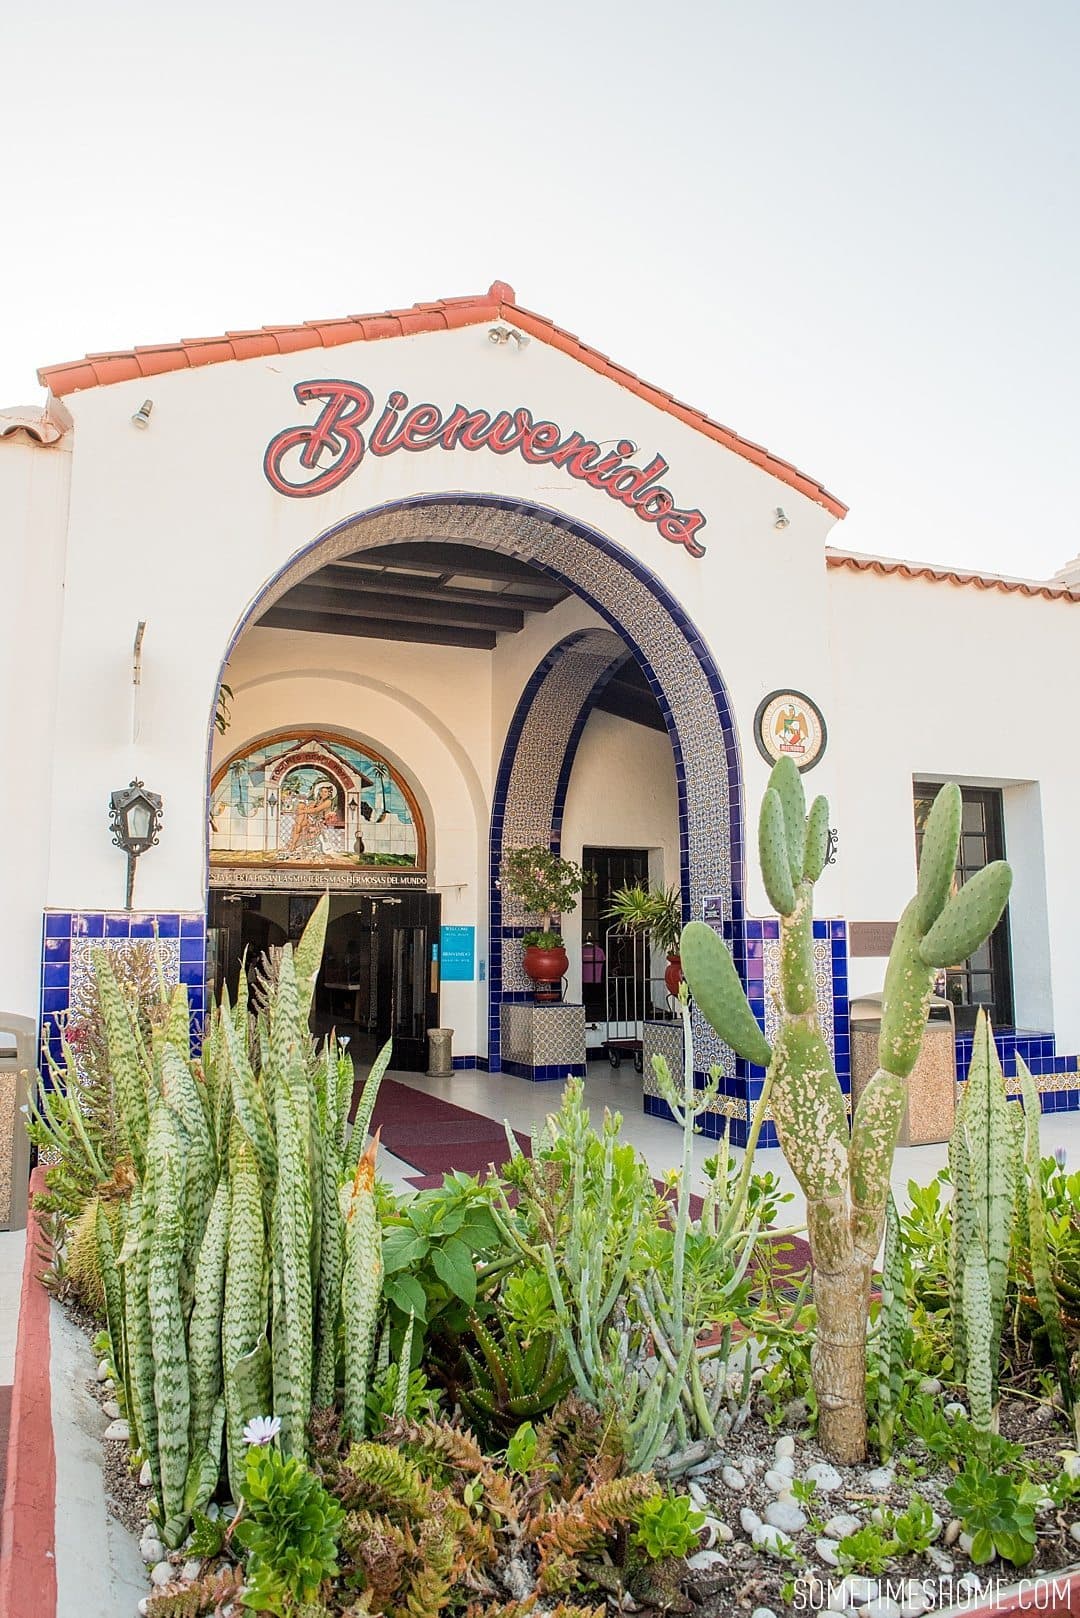 Photo spots at Rosarito Beach Hotel by travel blog Sometimes Home.